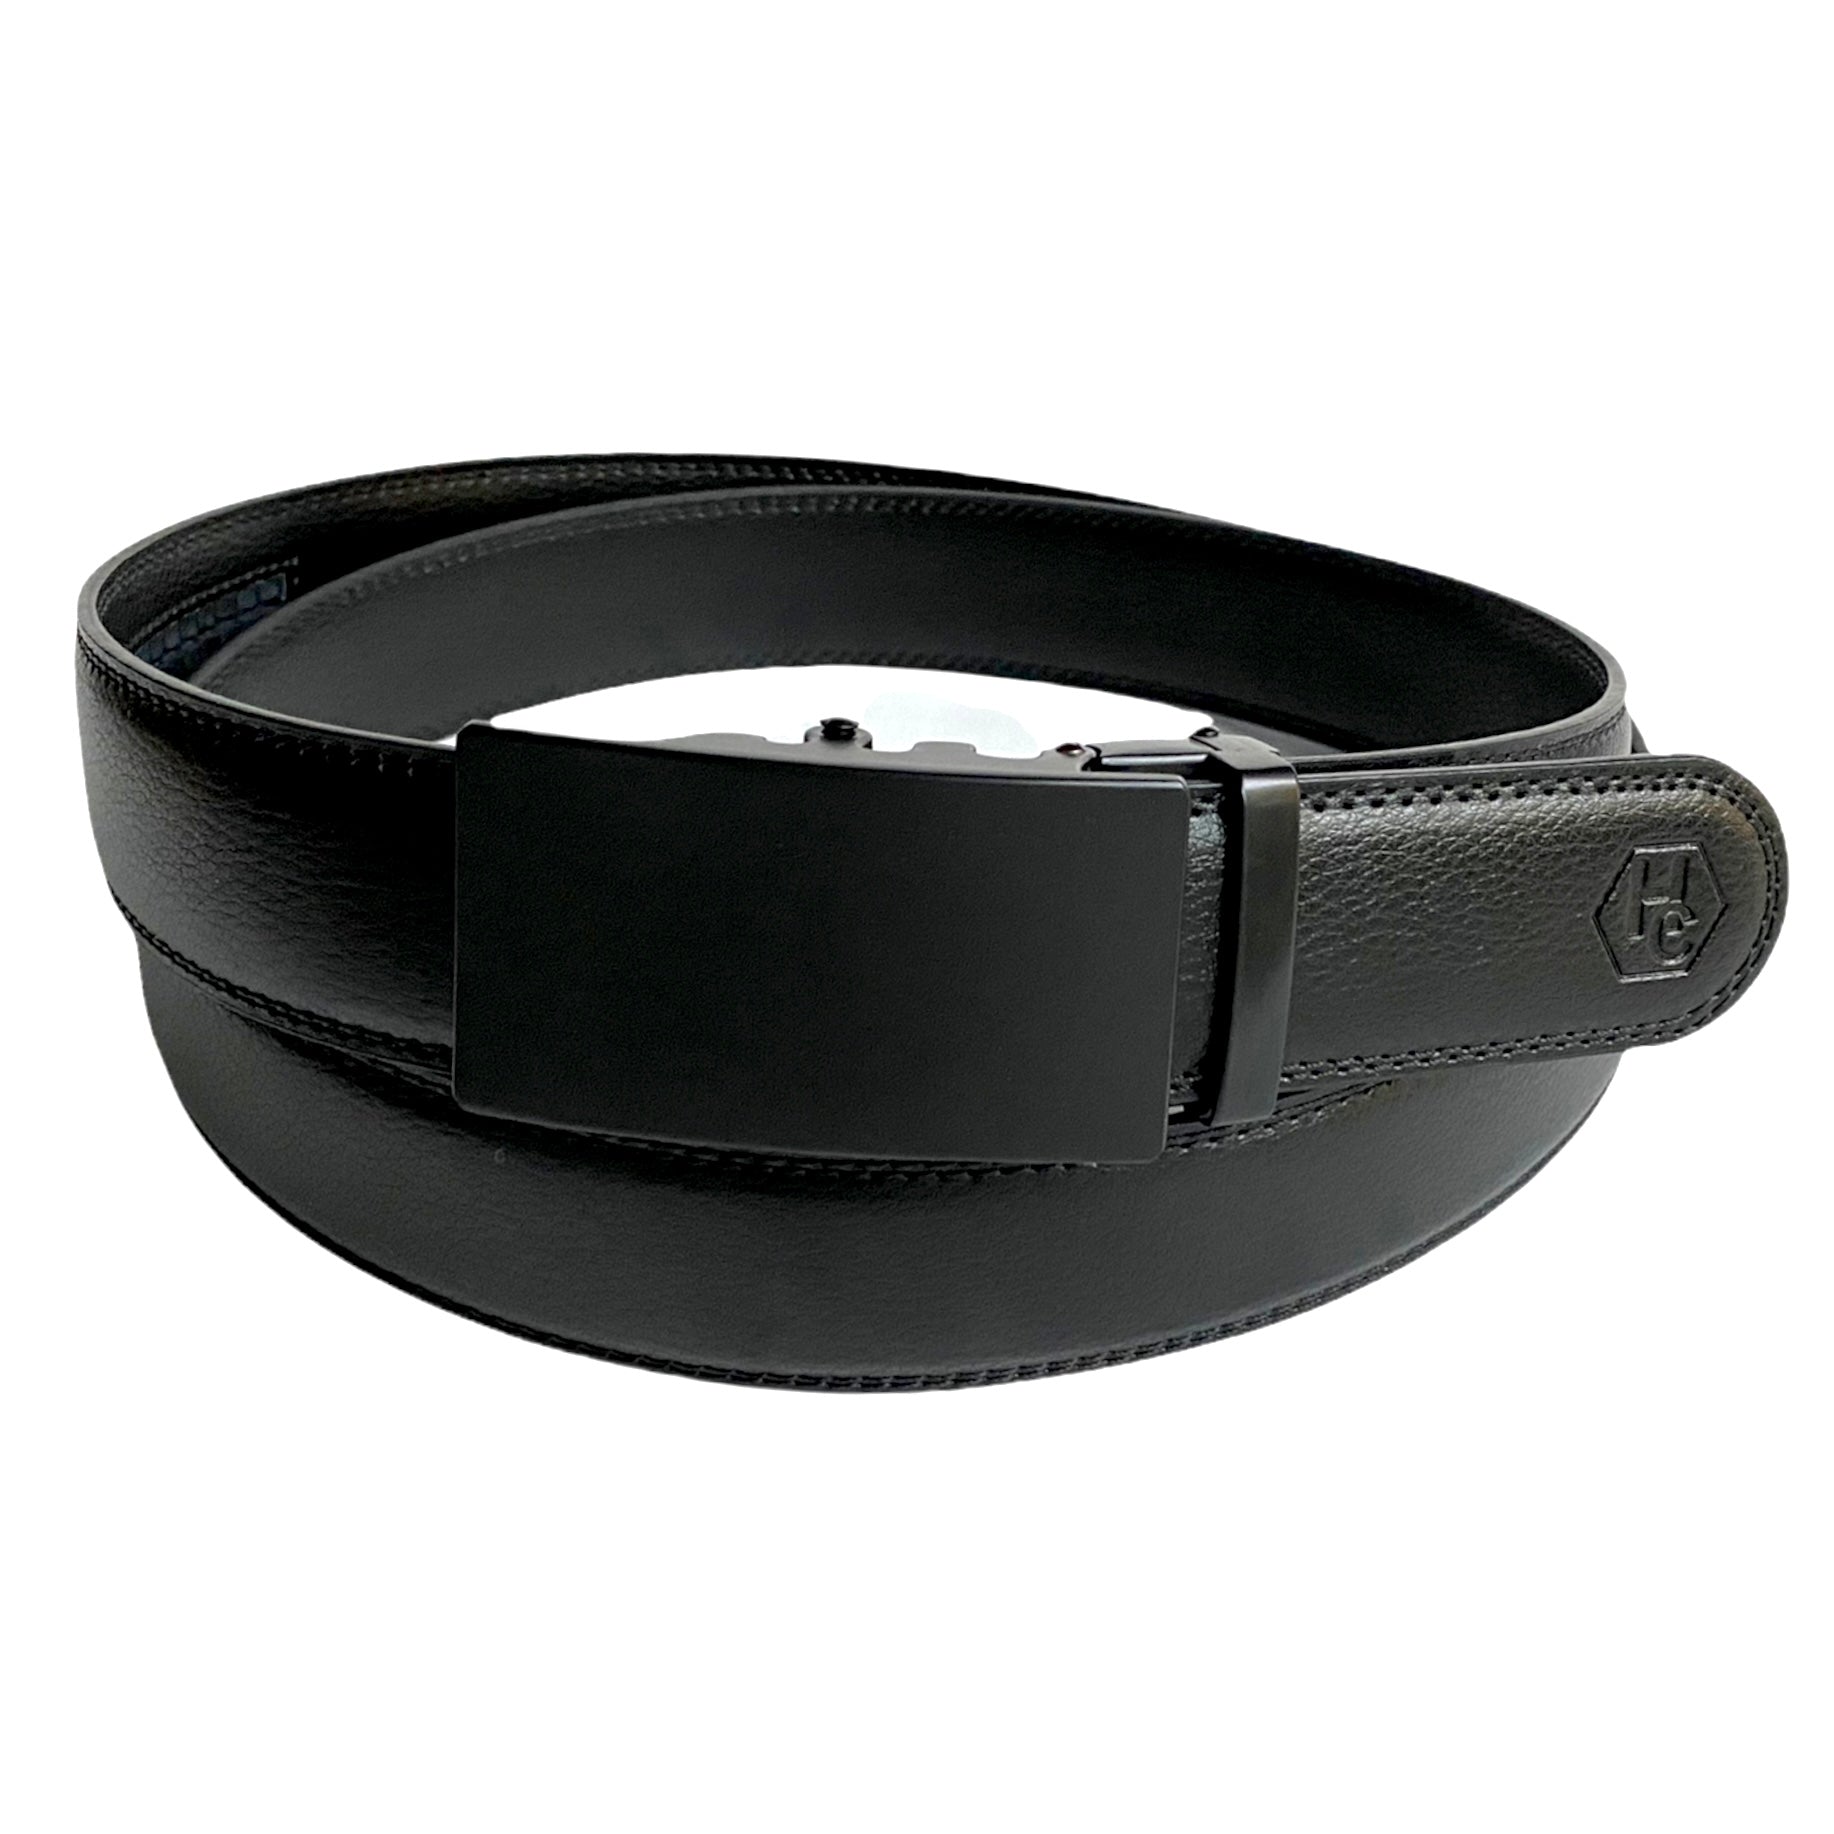 1.38" Genuine Leather Black Strap And 1.38" Automatic Belt Buckle Black